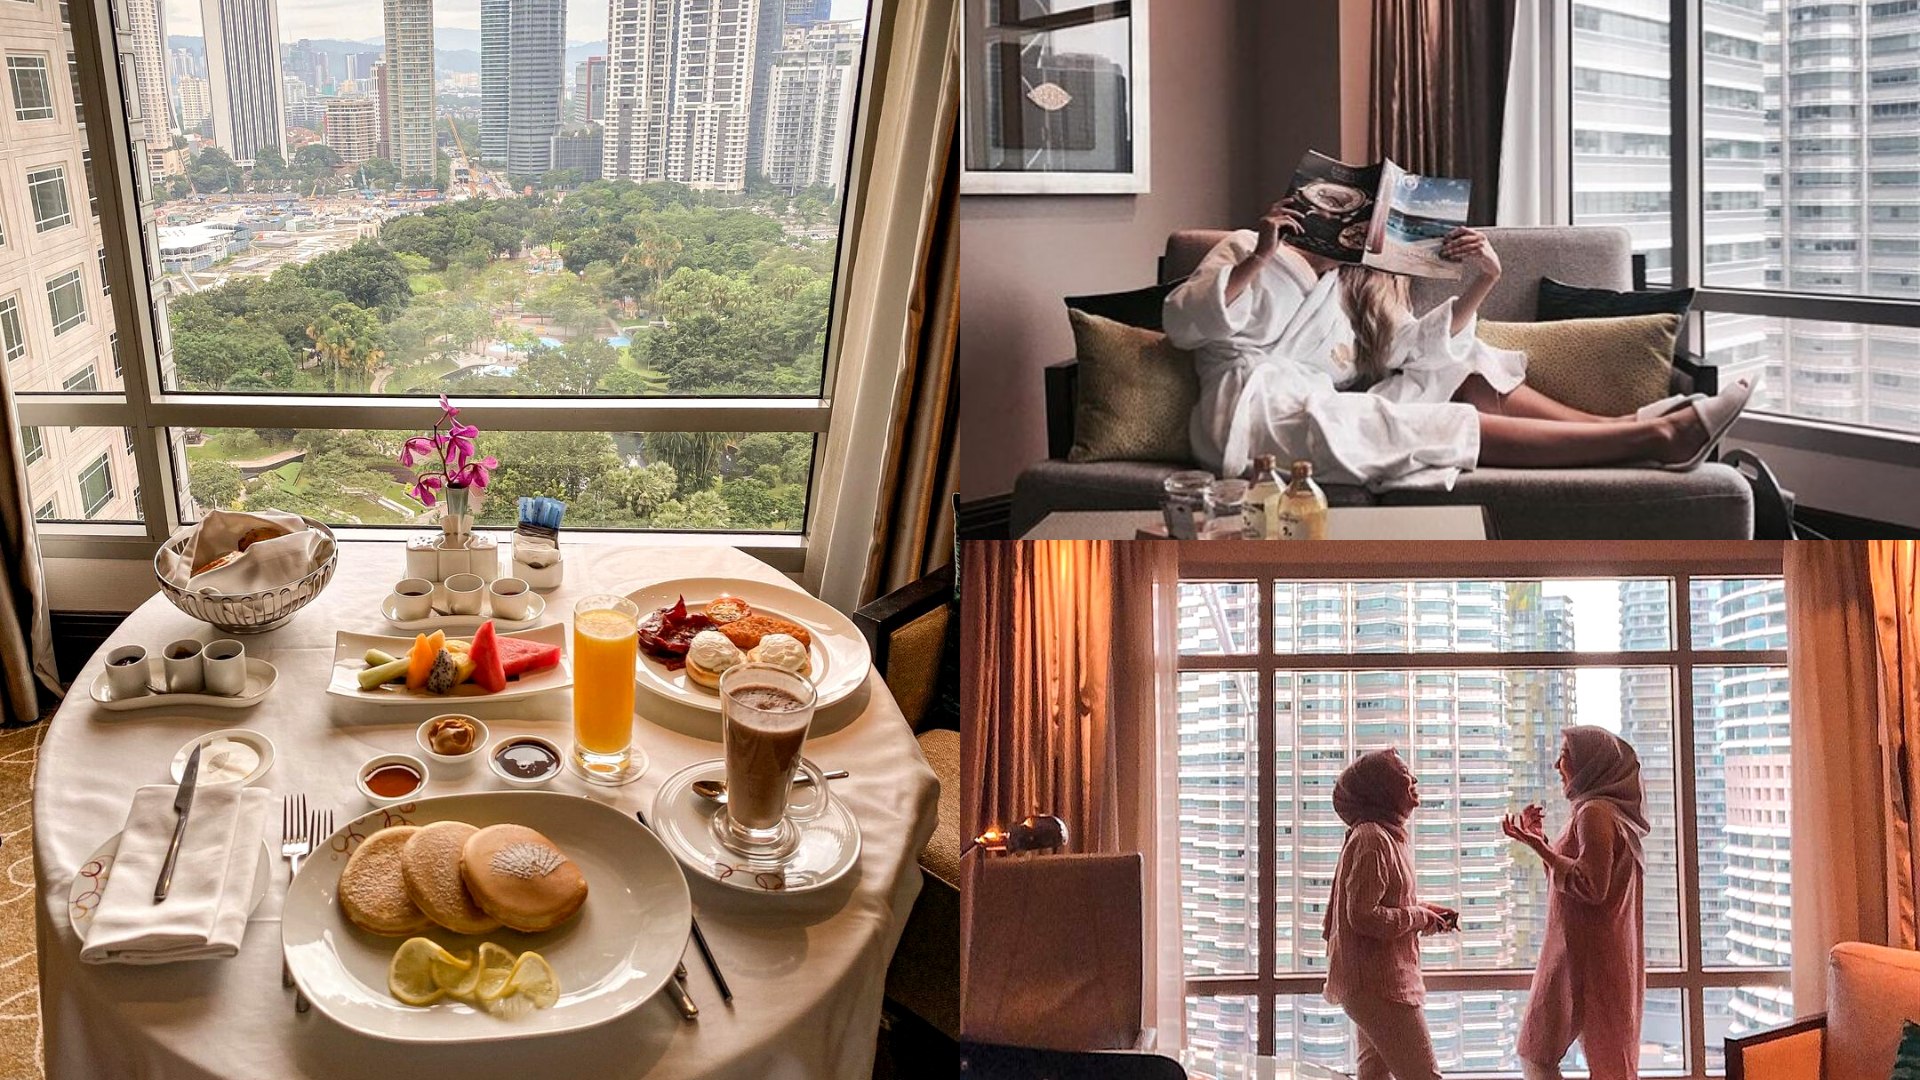 Mandarin Oriental Kl Great For Intimate Getaways Family Holidays Or A Luxurious Staycation Klook Travel Blogklook Travel